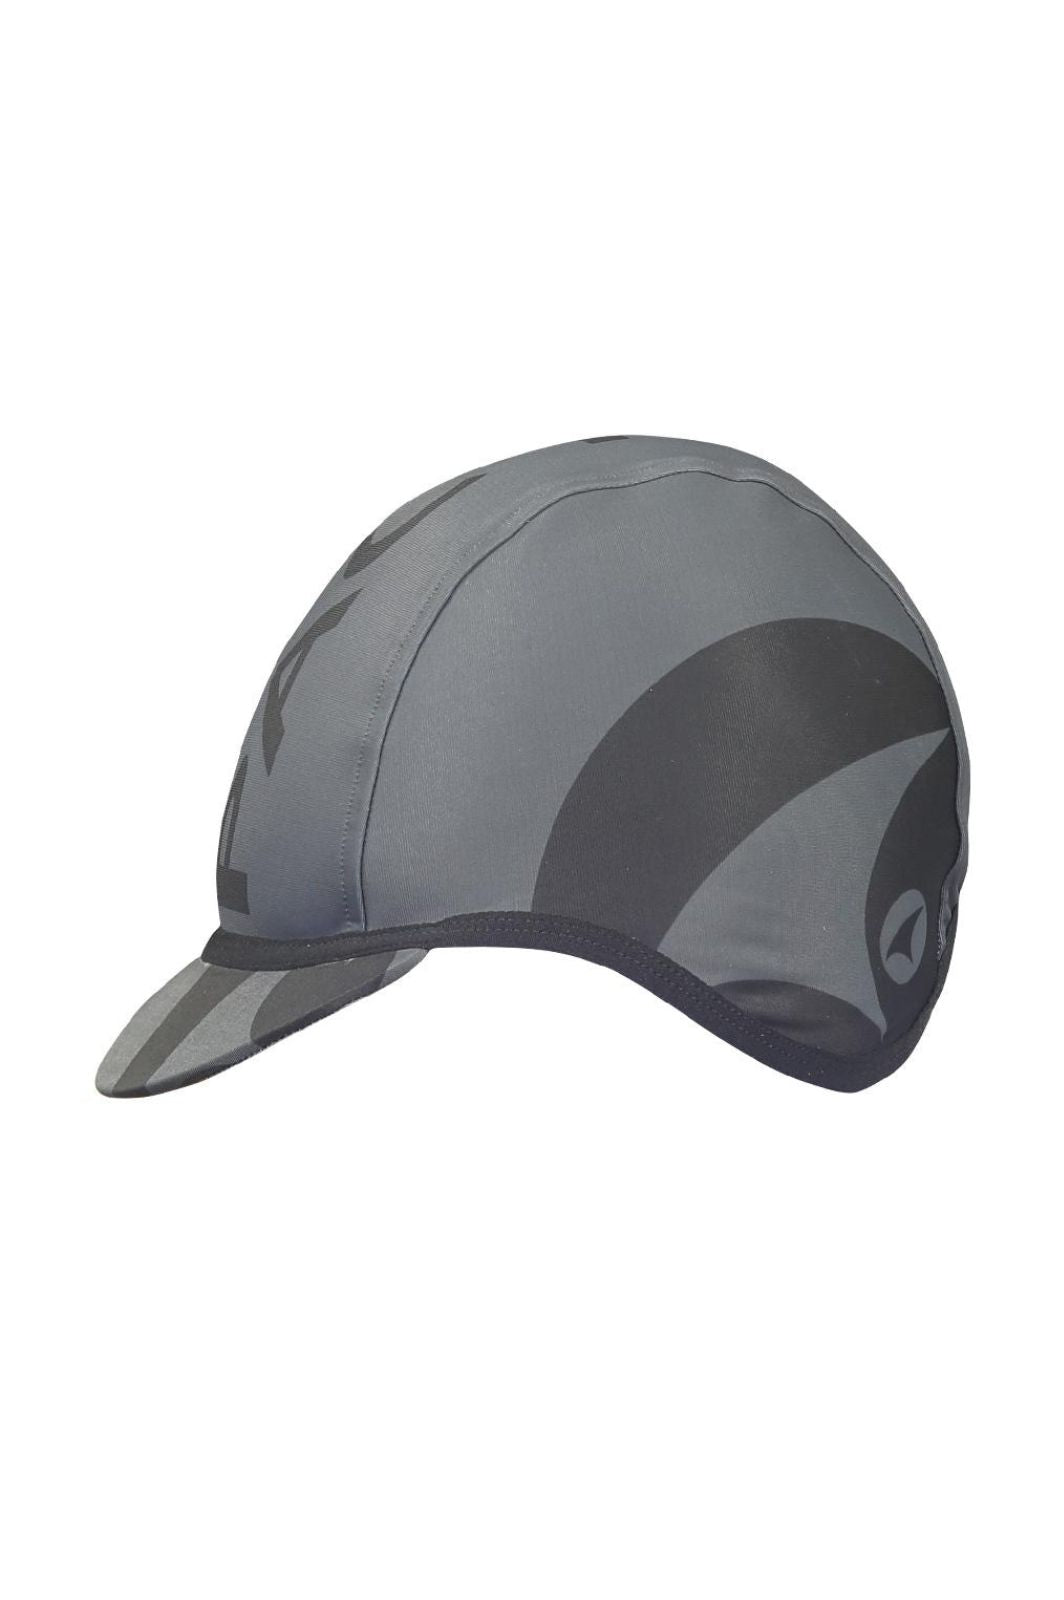 Black/Grey Winter Cycling Cap - Alpine Thermal Left View